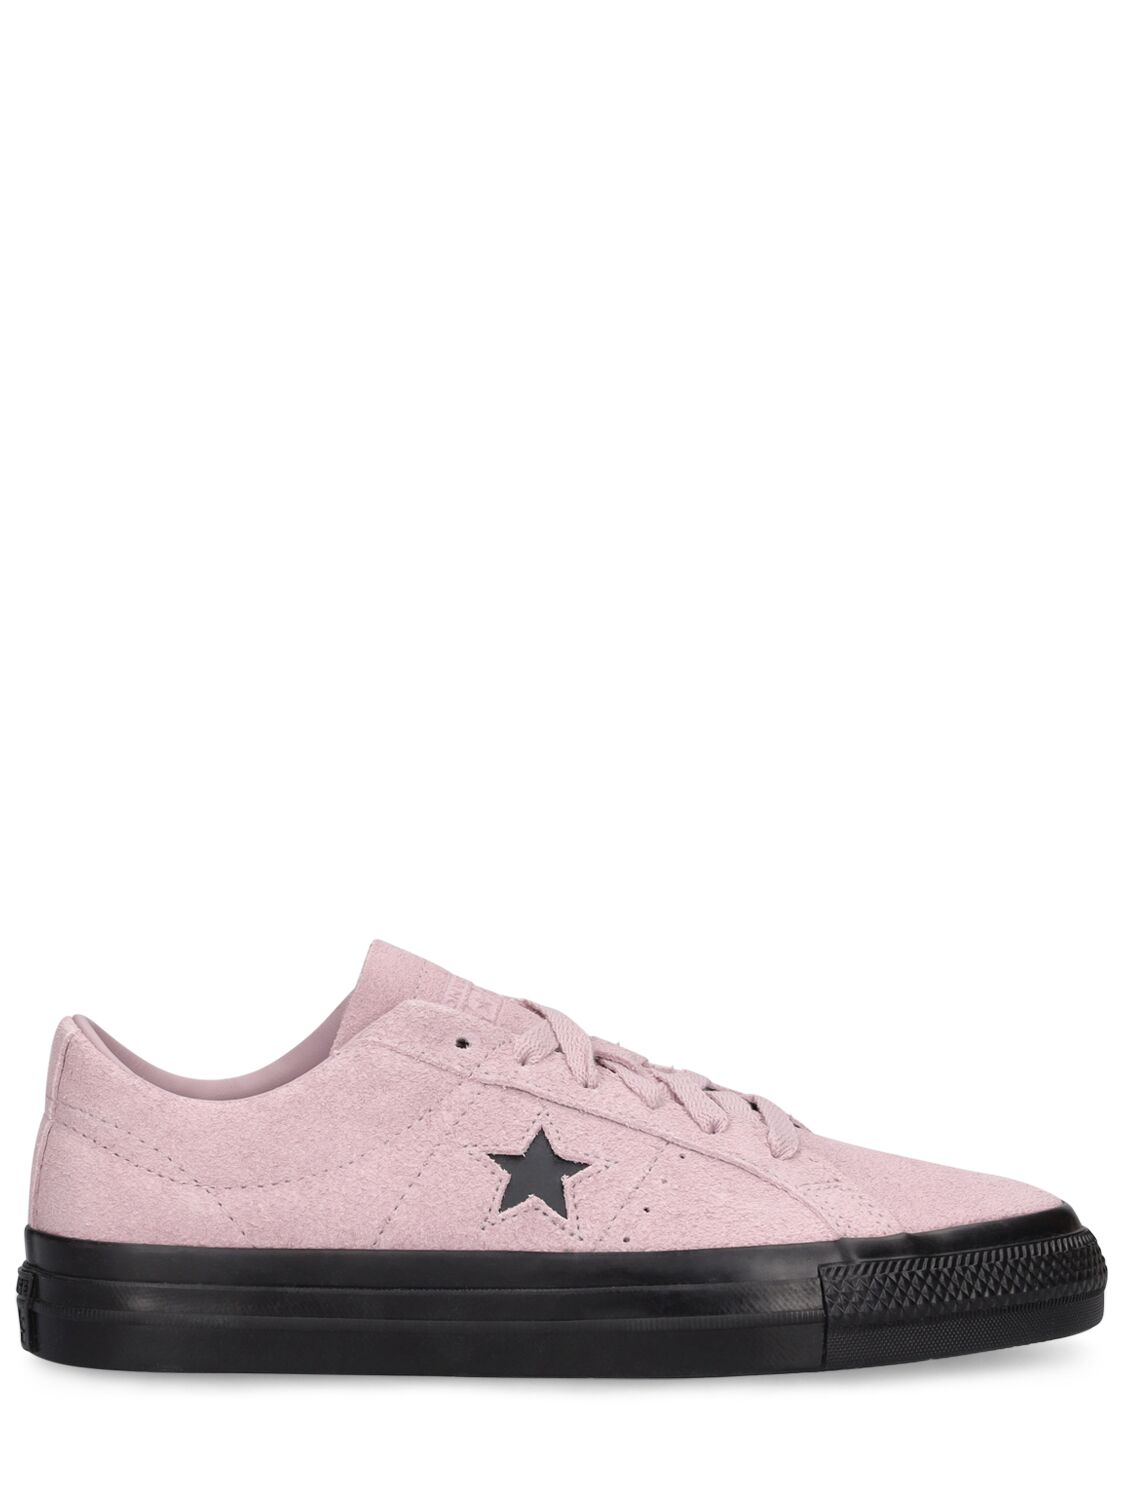 CONVERSE ONE STAR PRO CLASSIC SNEAKERS